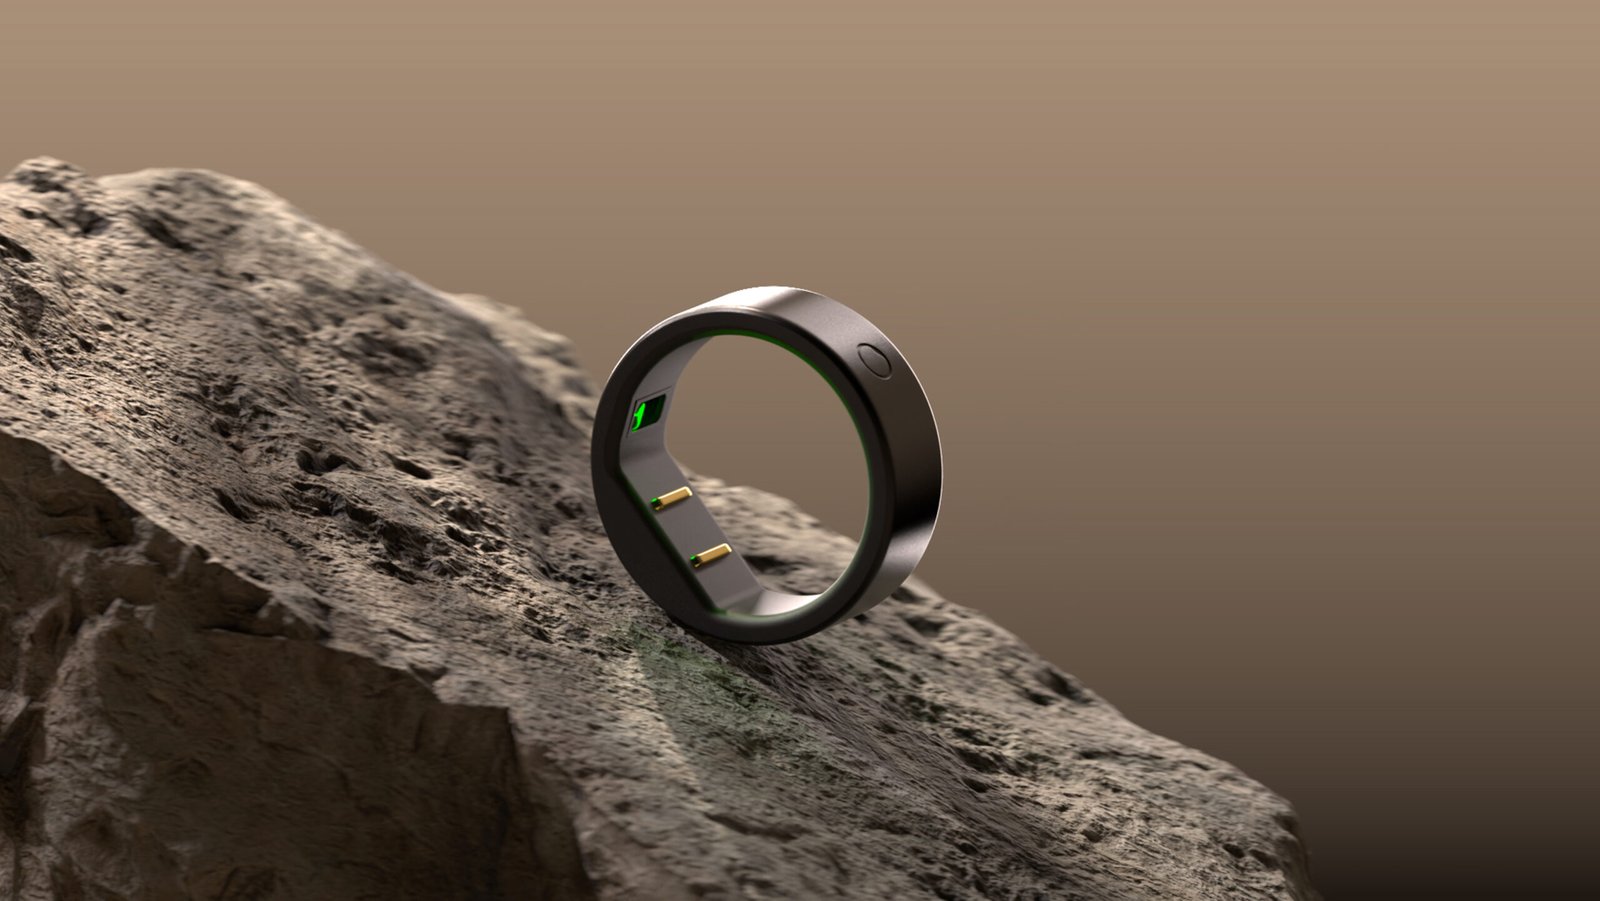 Circular drops a new Ring Slim along with key software upgrades for current users